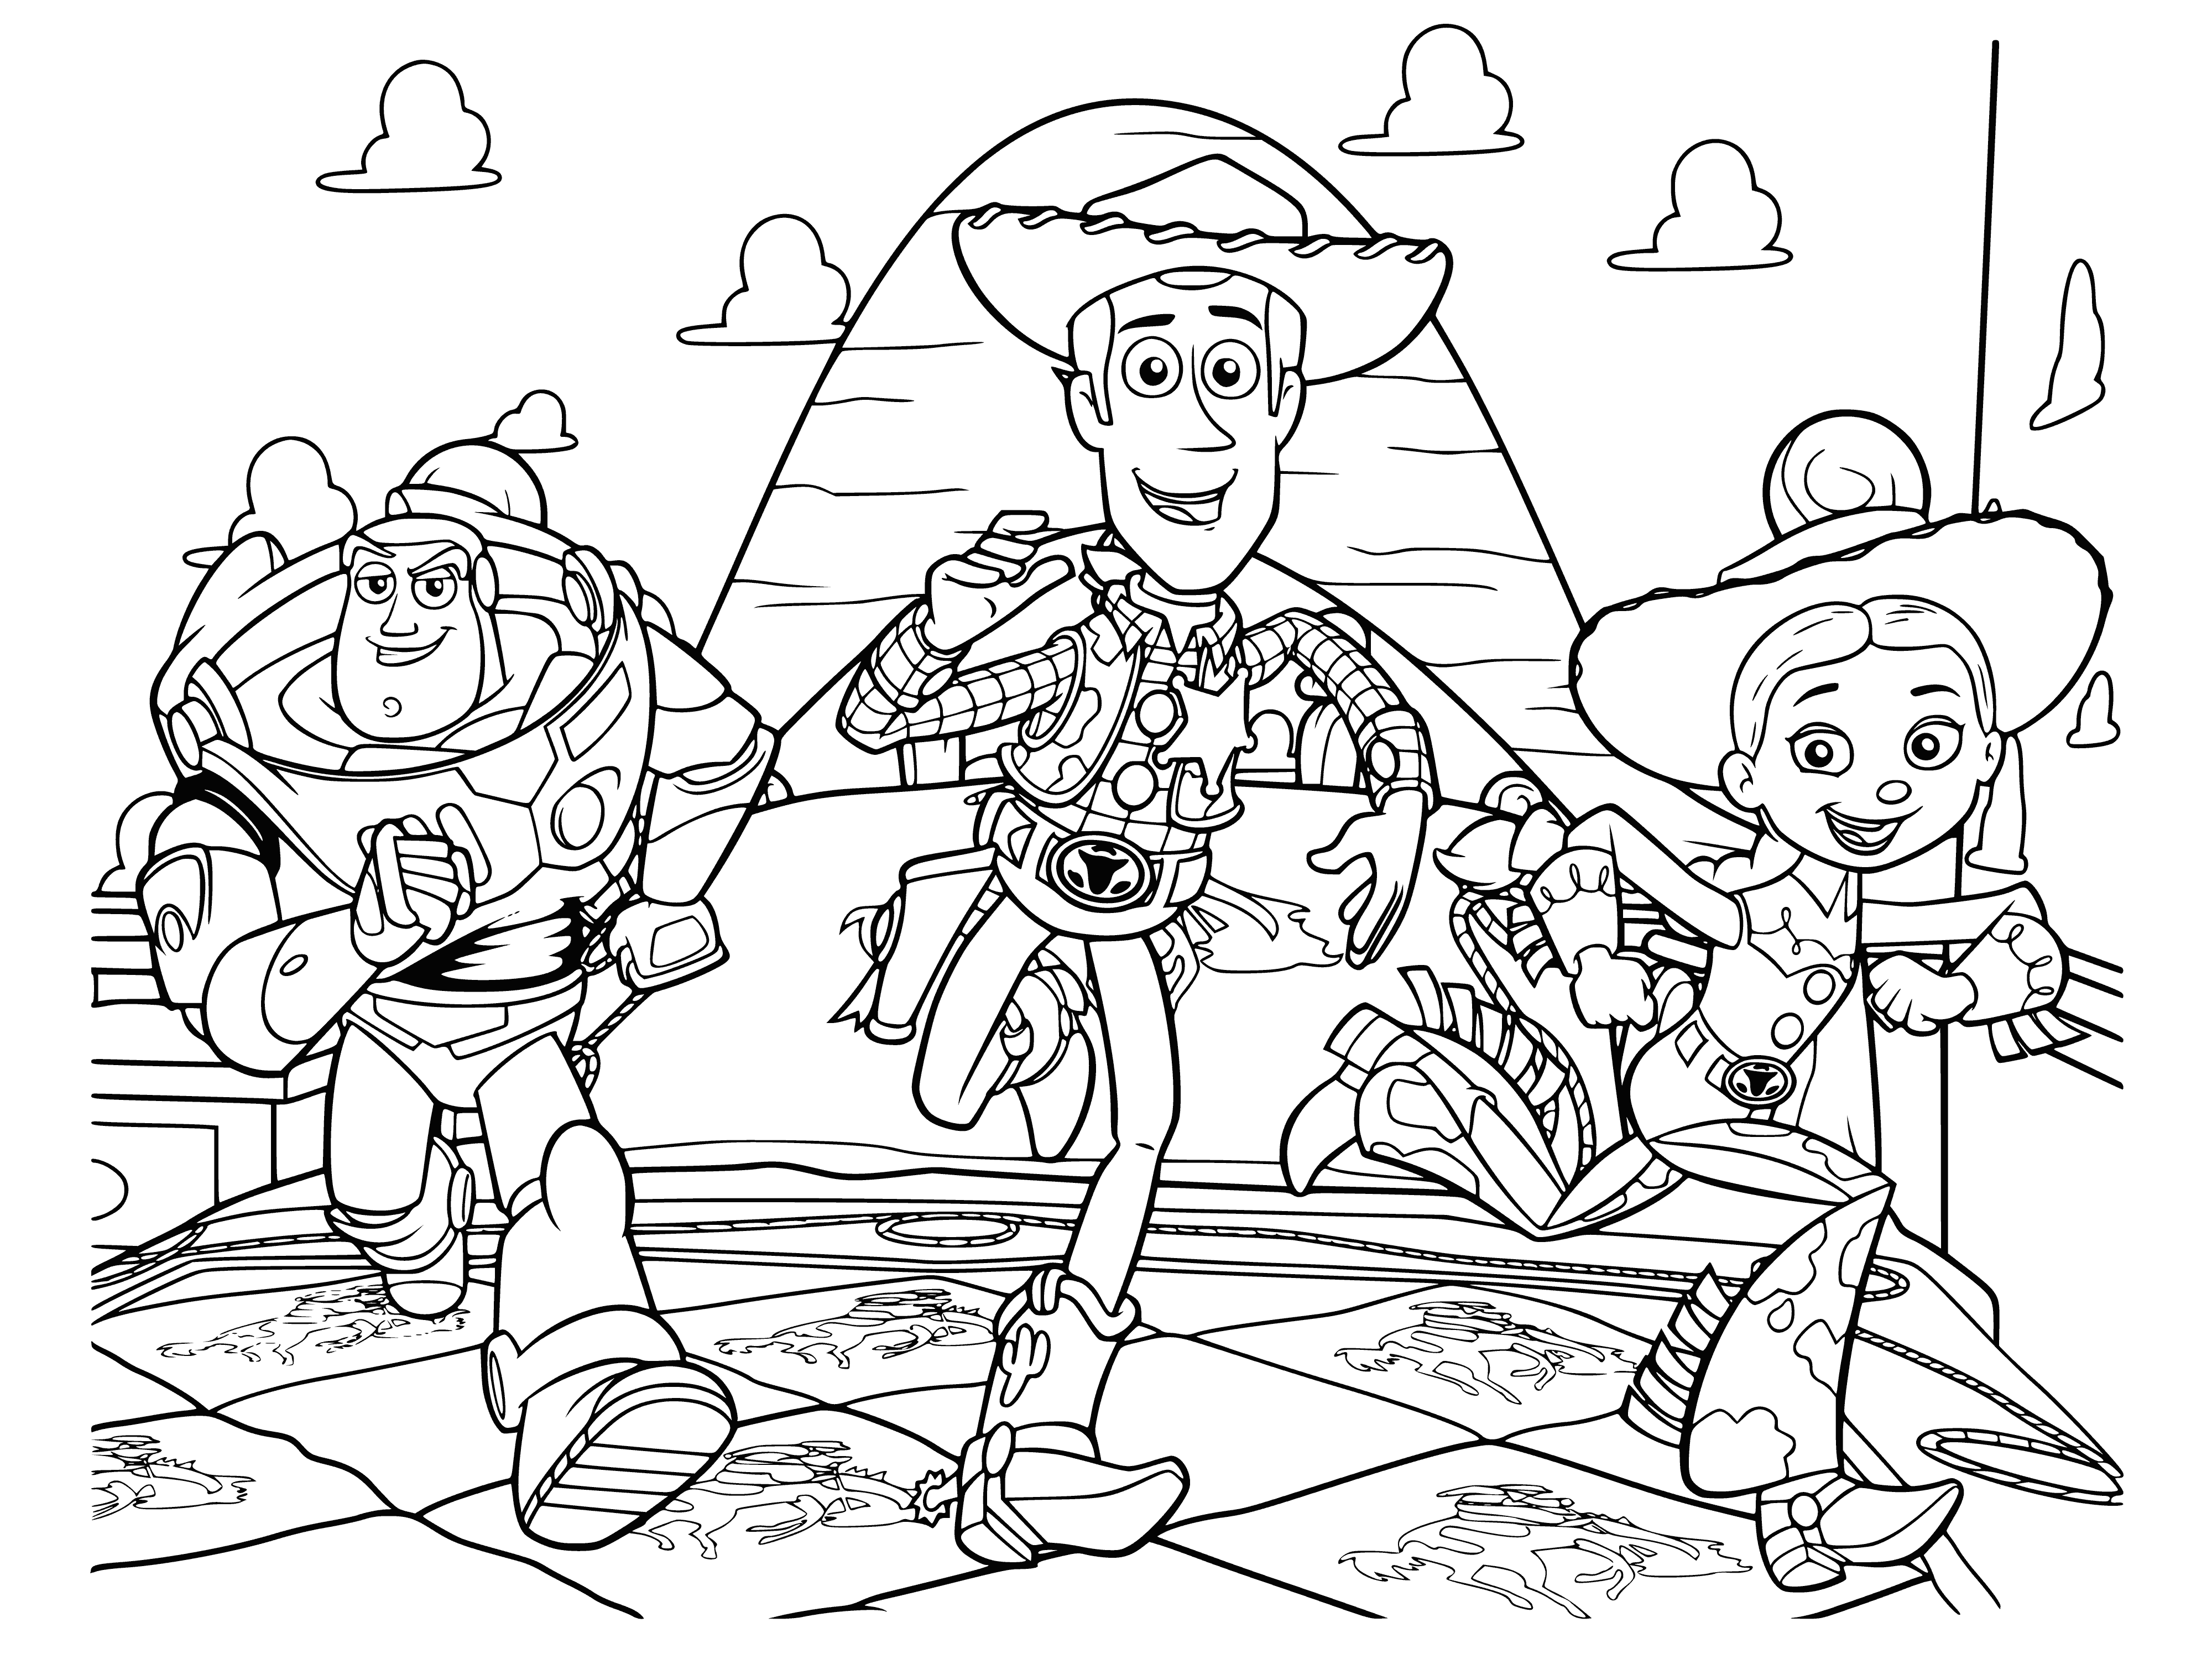 Buzz, Woody and Jesse coloring page